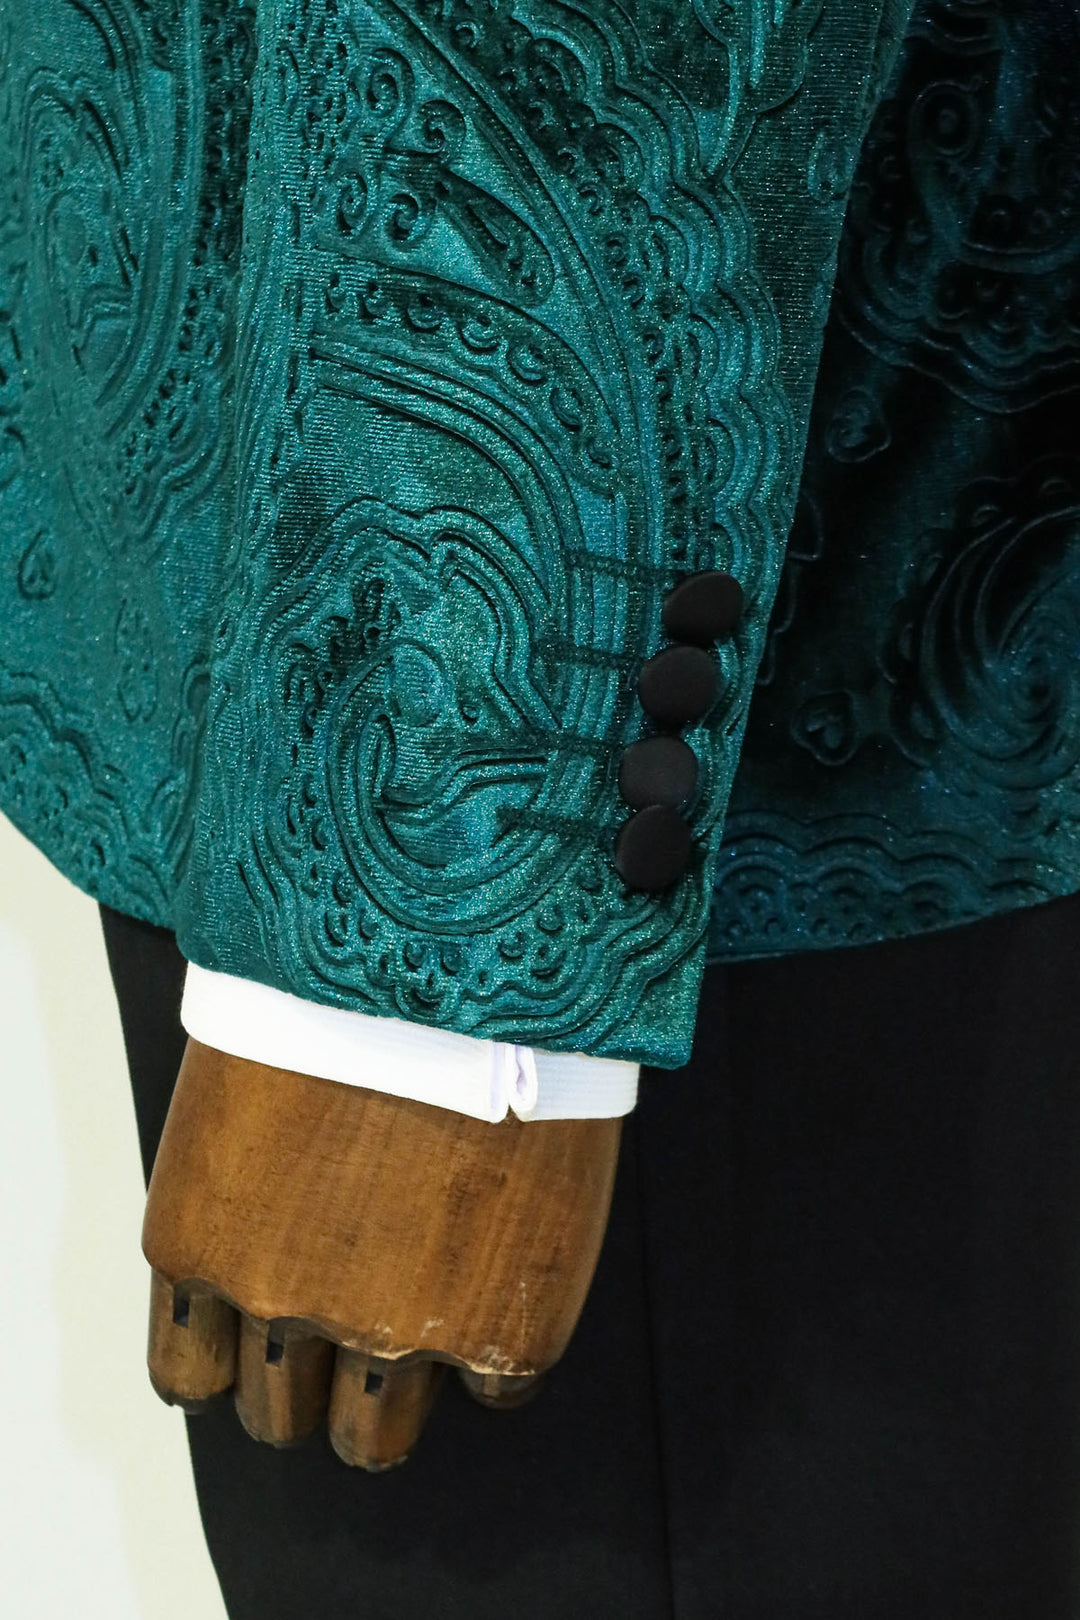 Floral Patterned Velvet Green Men Prom Blazer and Trousers Combination- Wessi